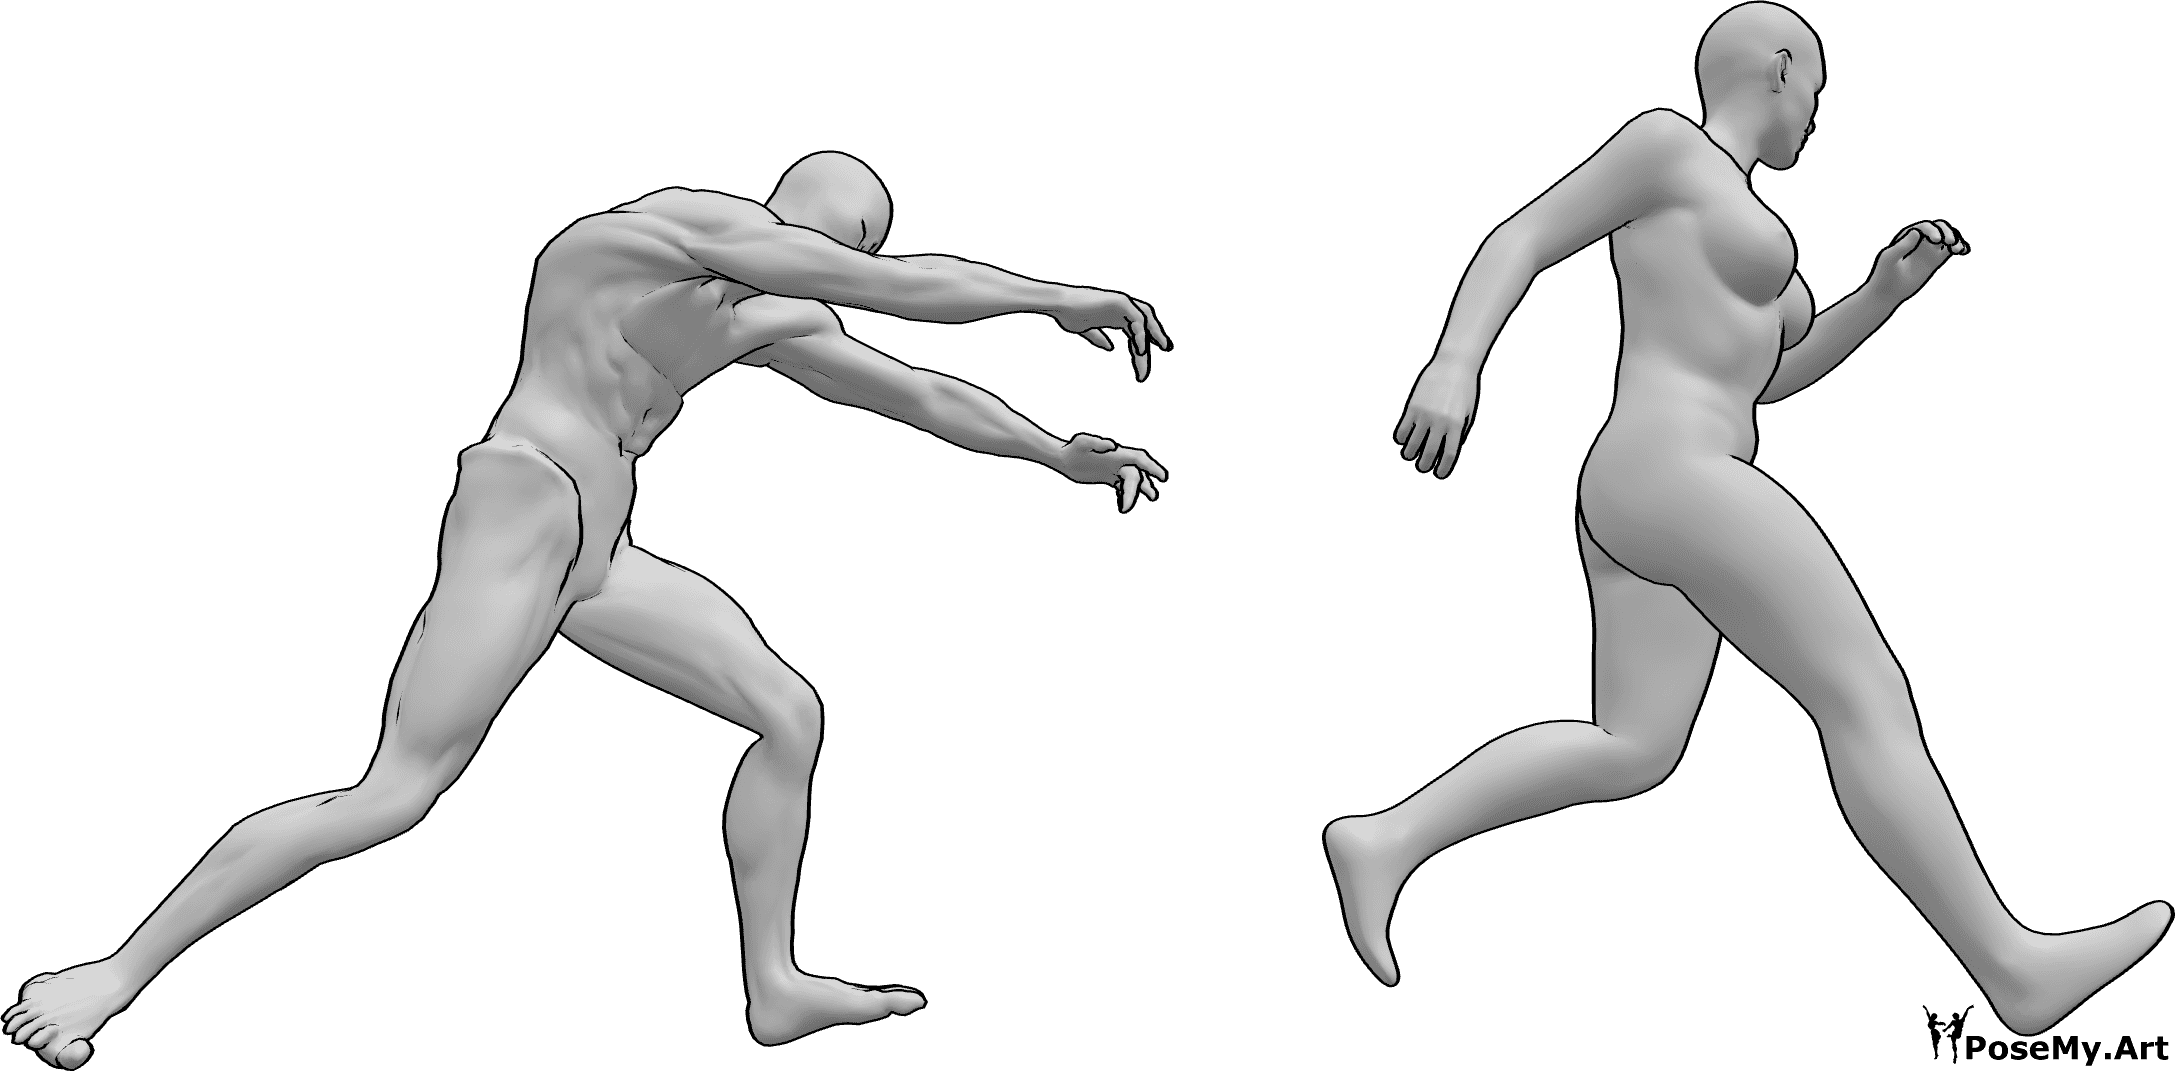 Pose Reference- Zombie chasing female pose - Zombie is chasing a female who is trying to run away from him